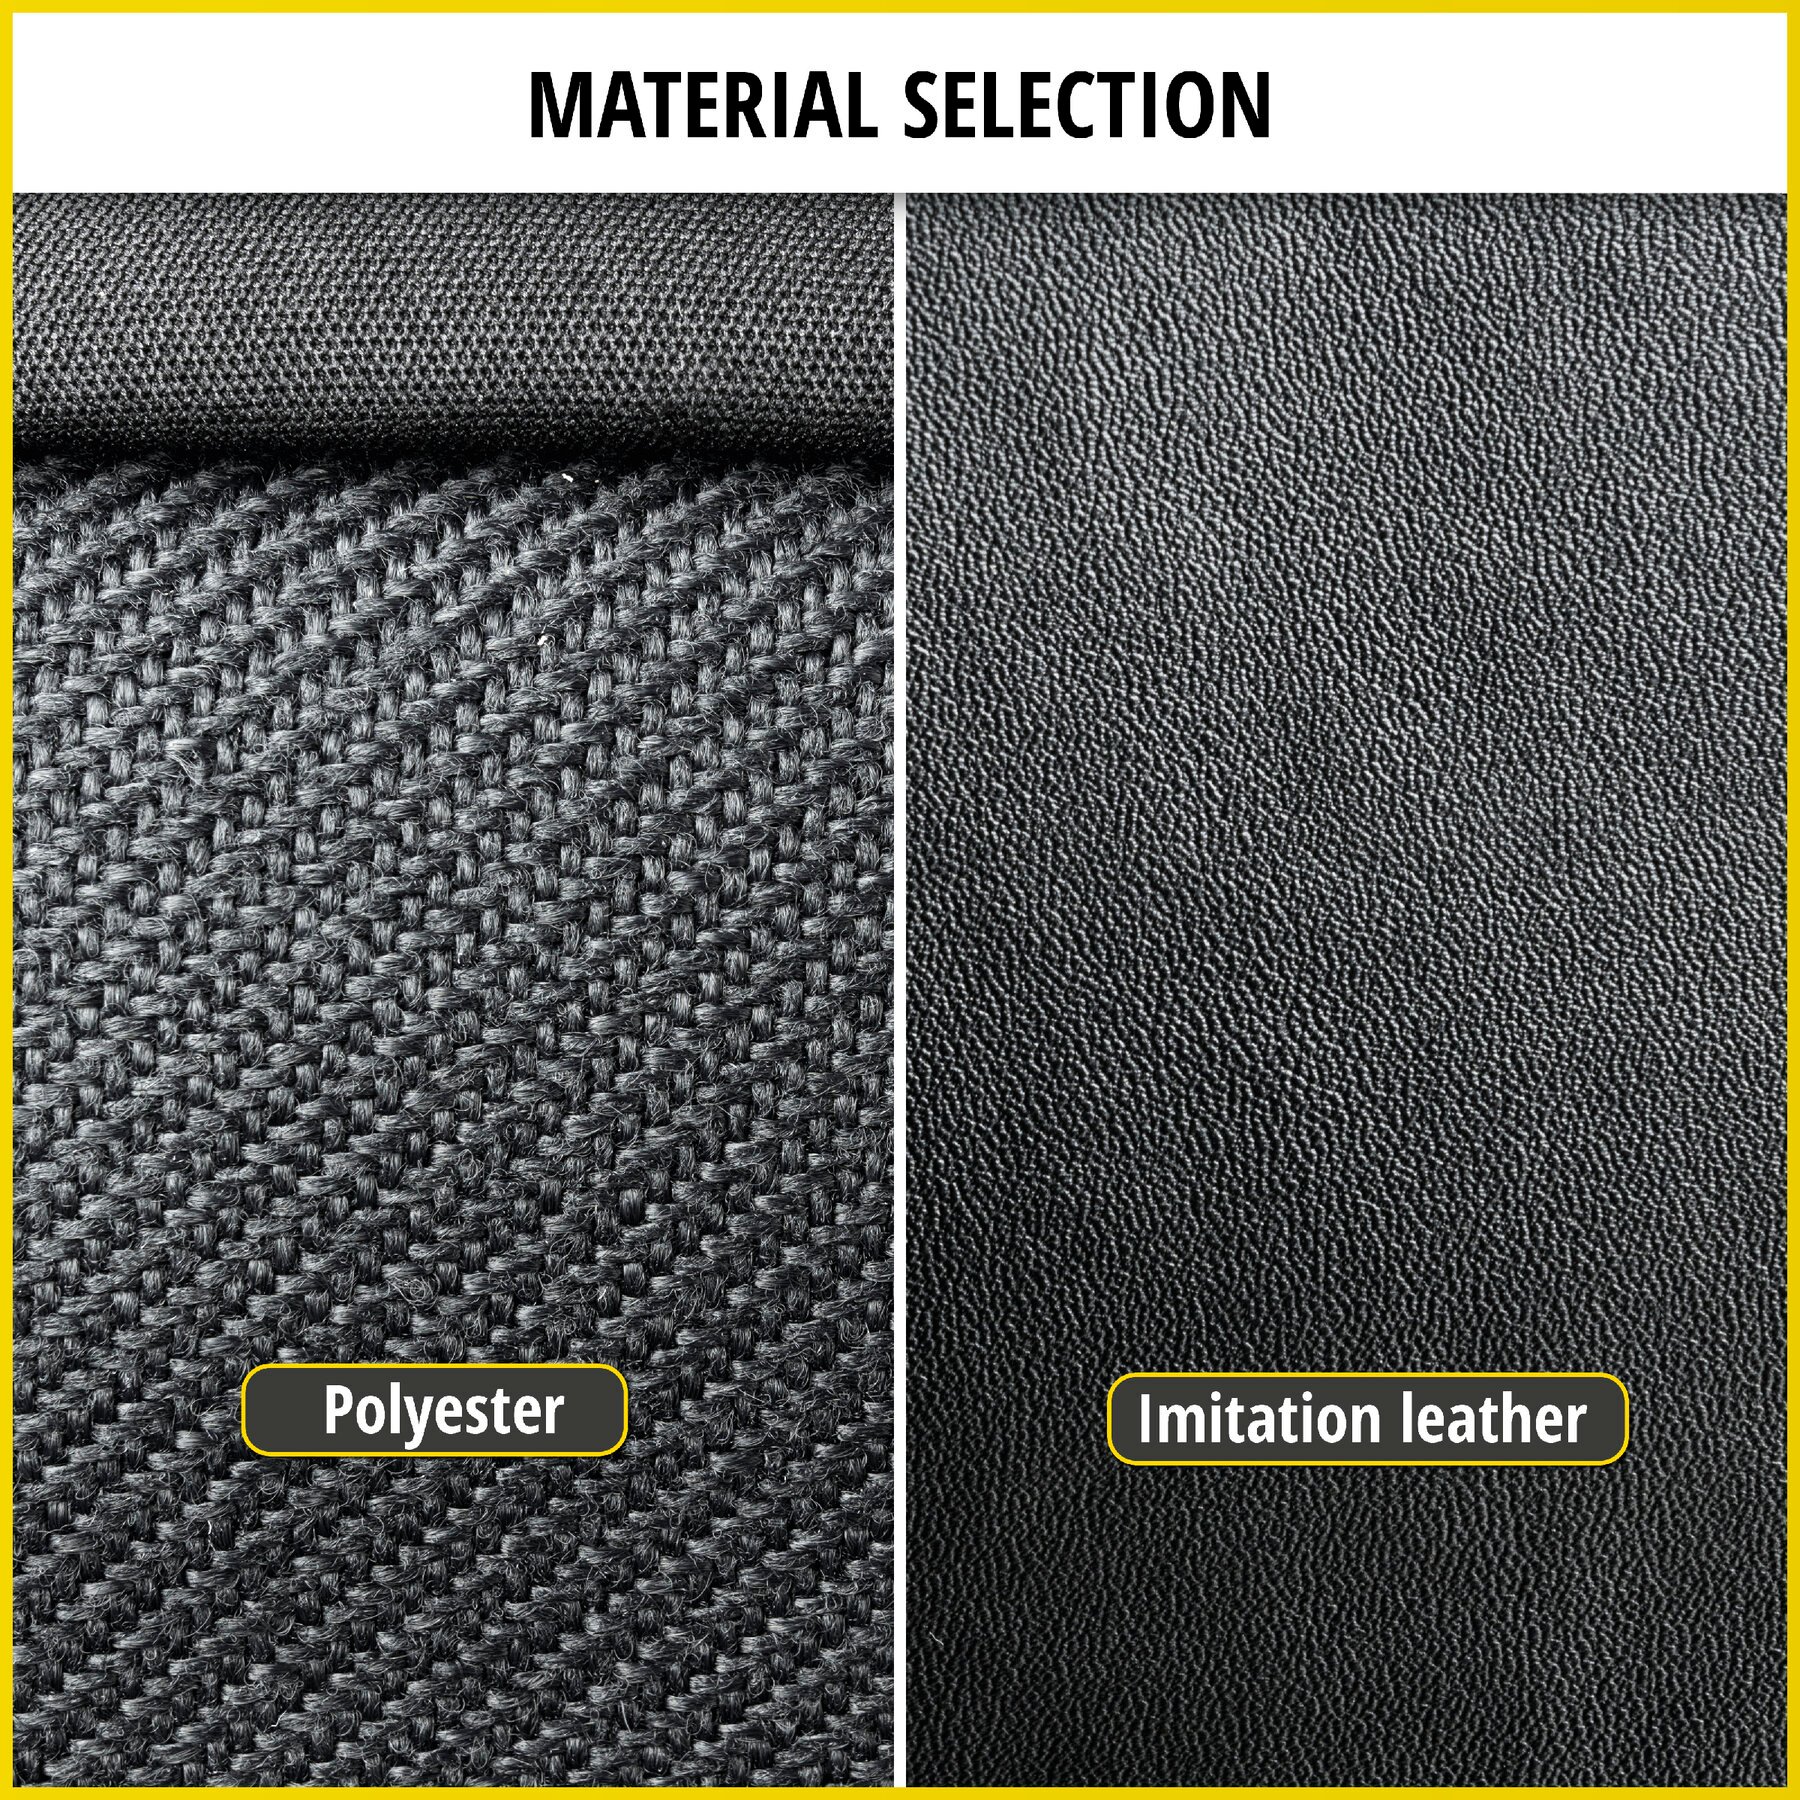 Seat cover made of fabric for Mercedes Vito 447, single seat with armrest inside